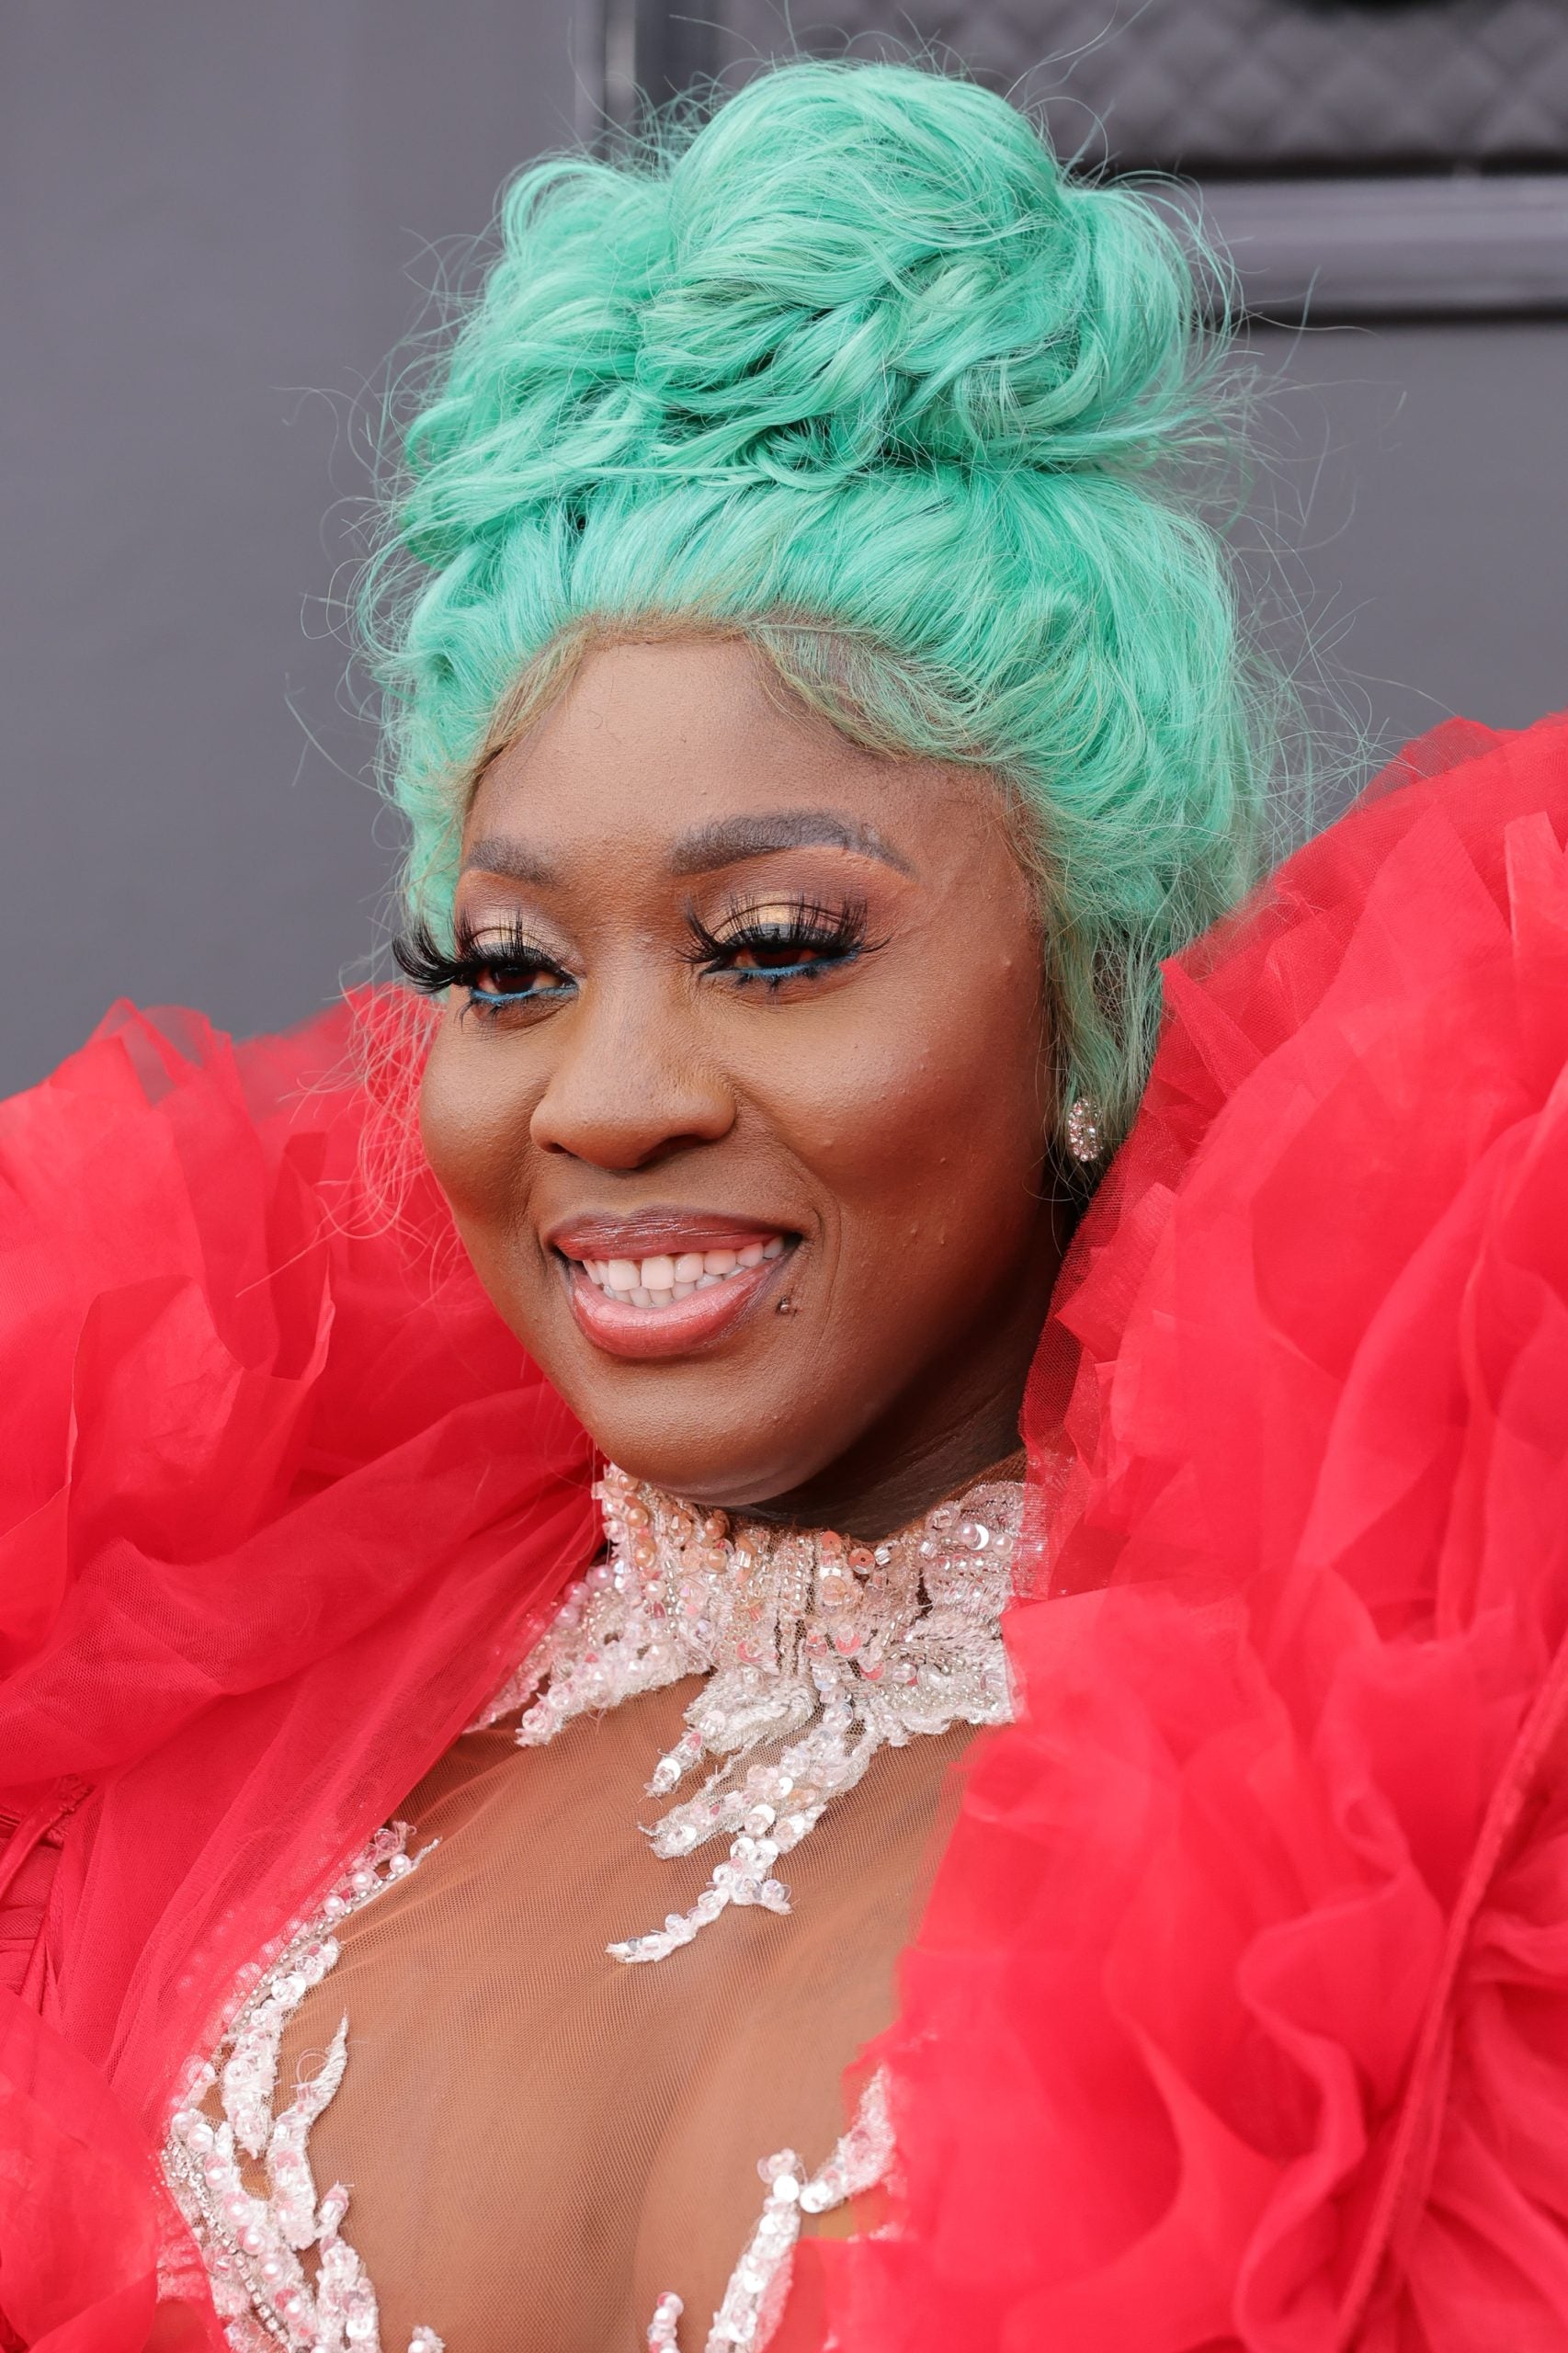 Behold, The Boldest Hair Colors Seen At The 2022 Grammys